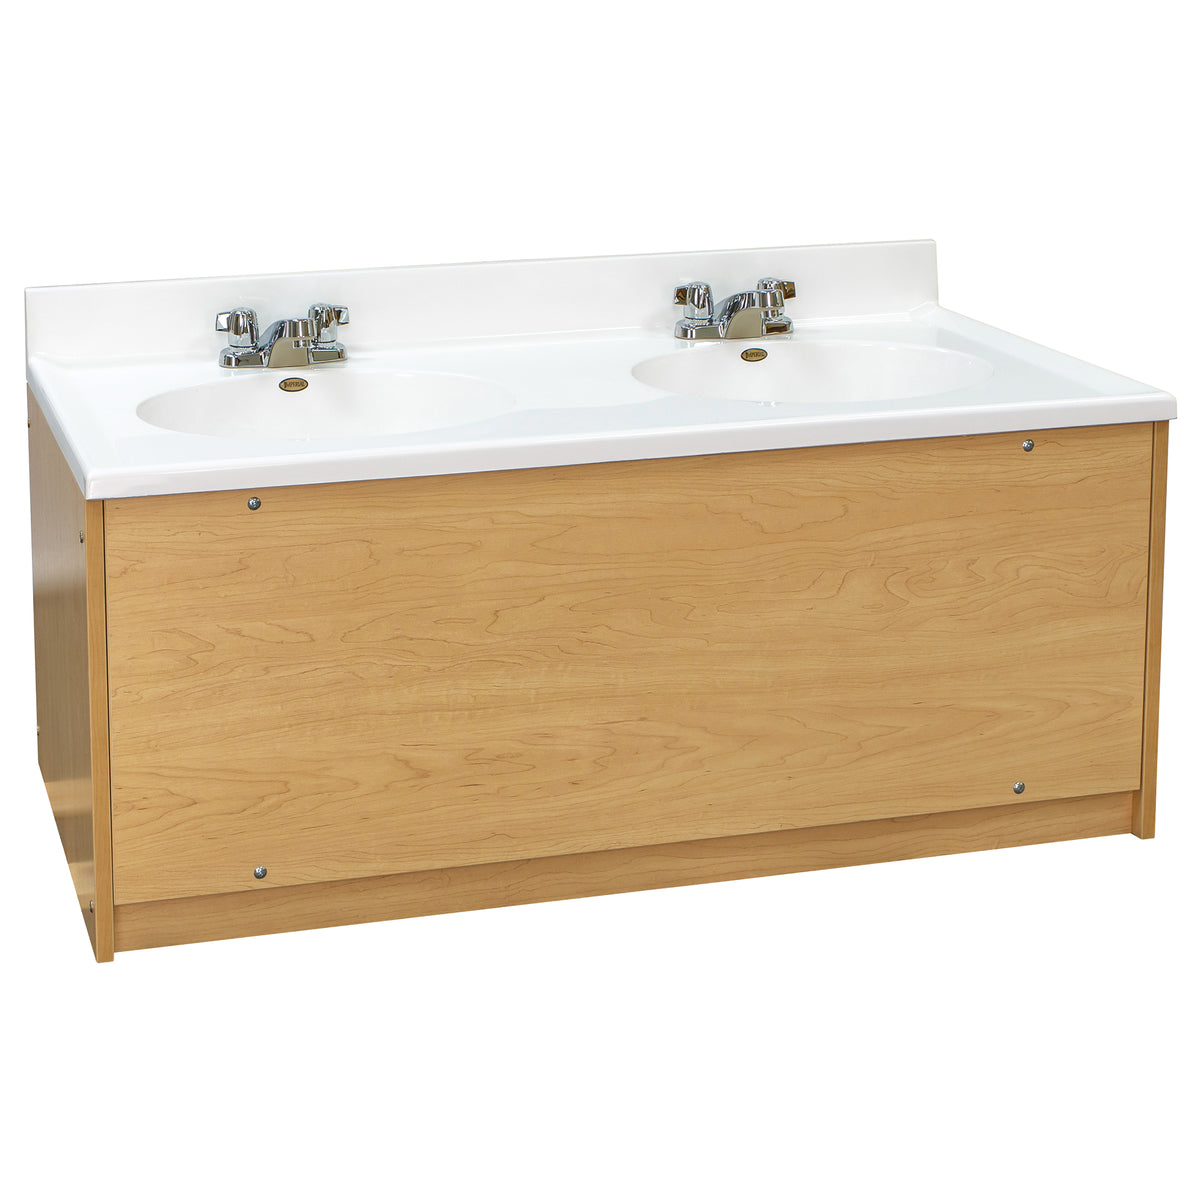 Double Floor Vanity For Children With White Marble Countertop and Maple Wood Base.